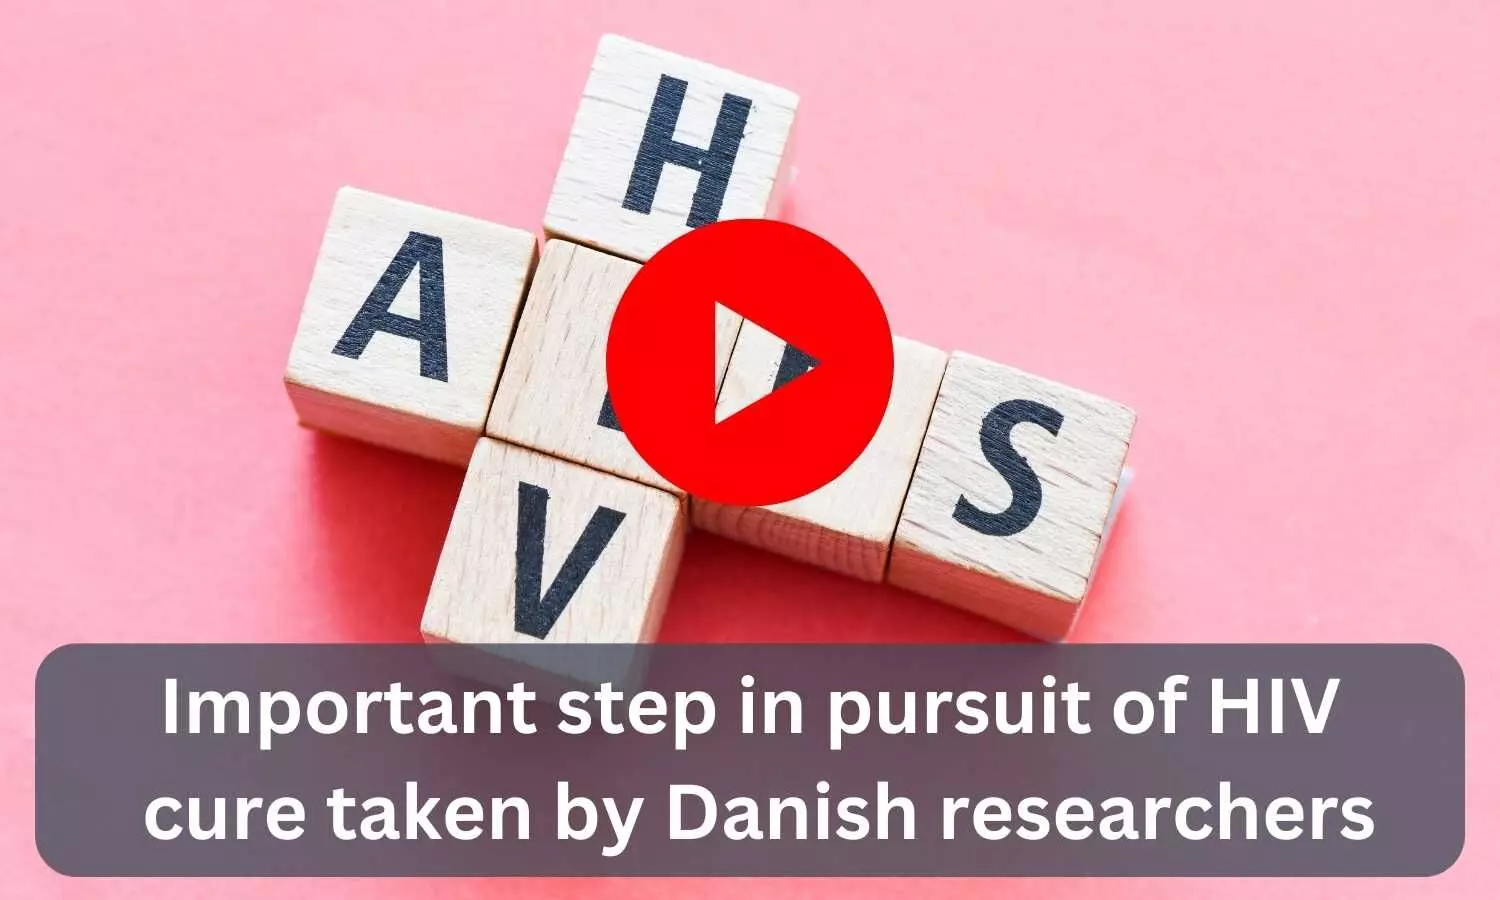 Important step in pursuit of HIV cure taken by Danish researchers